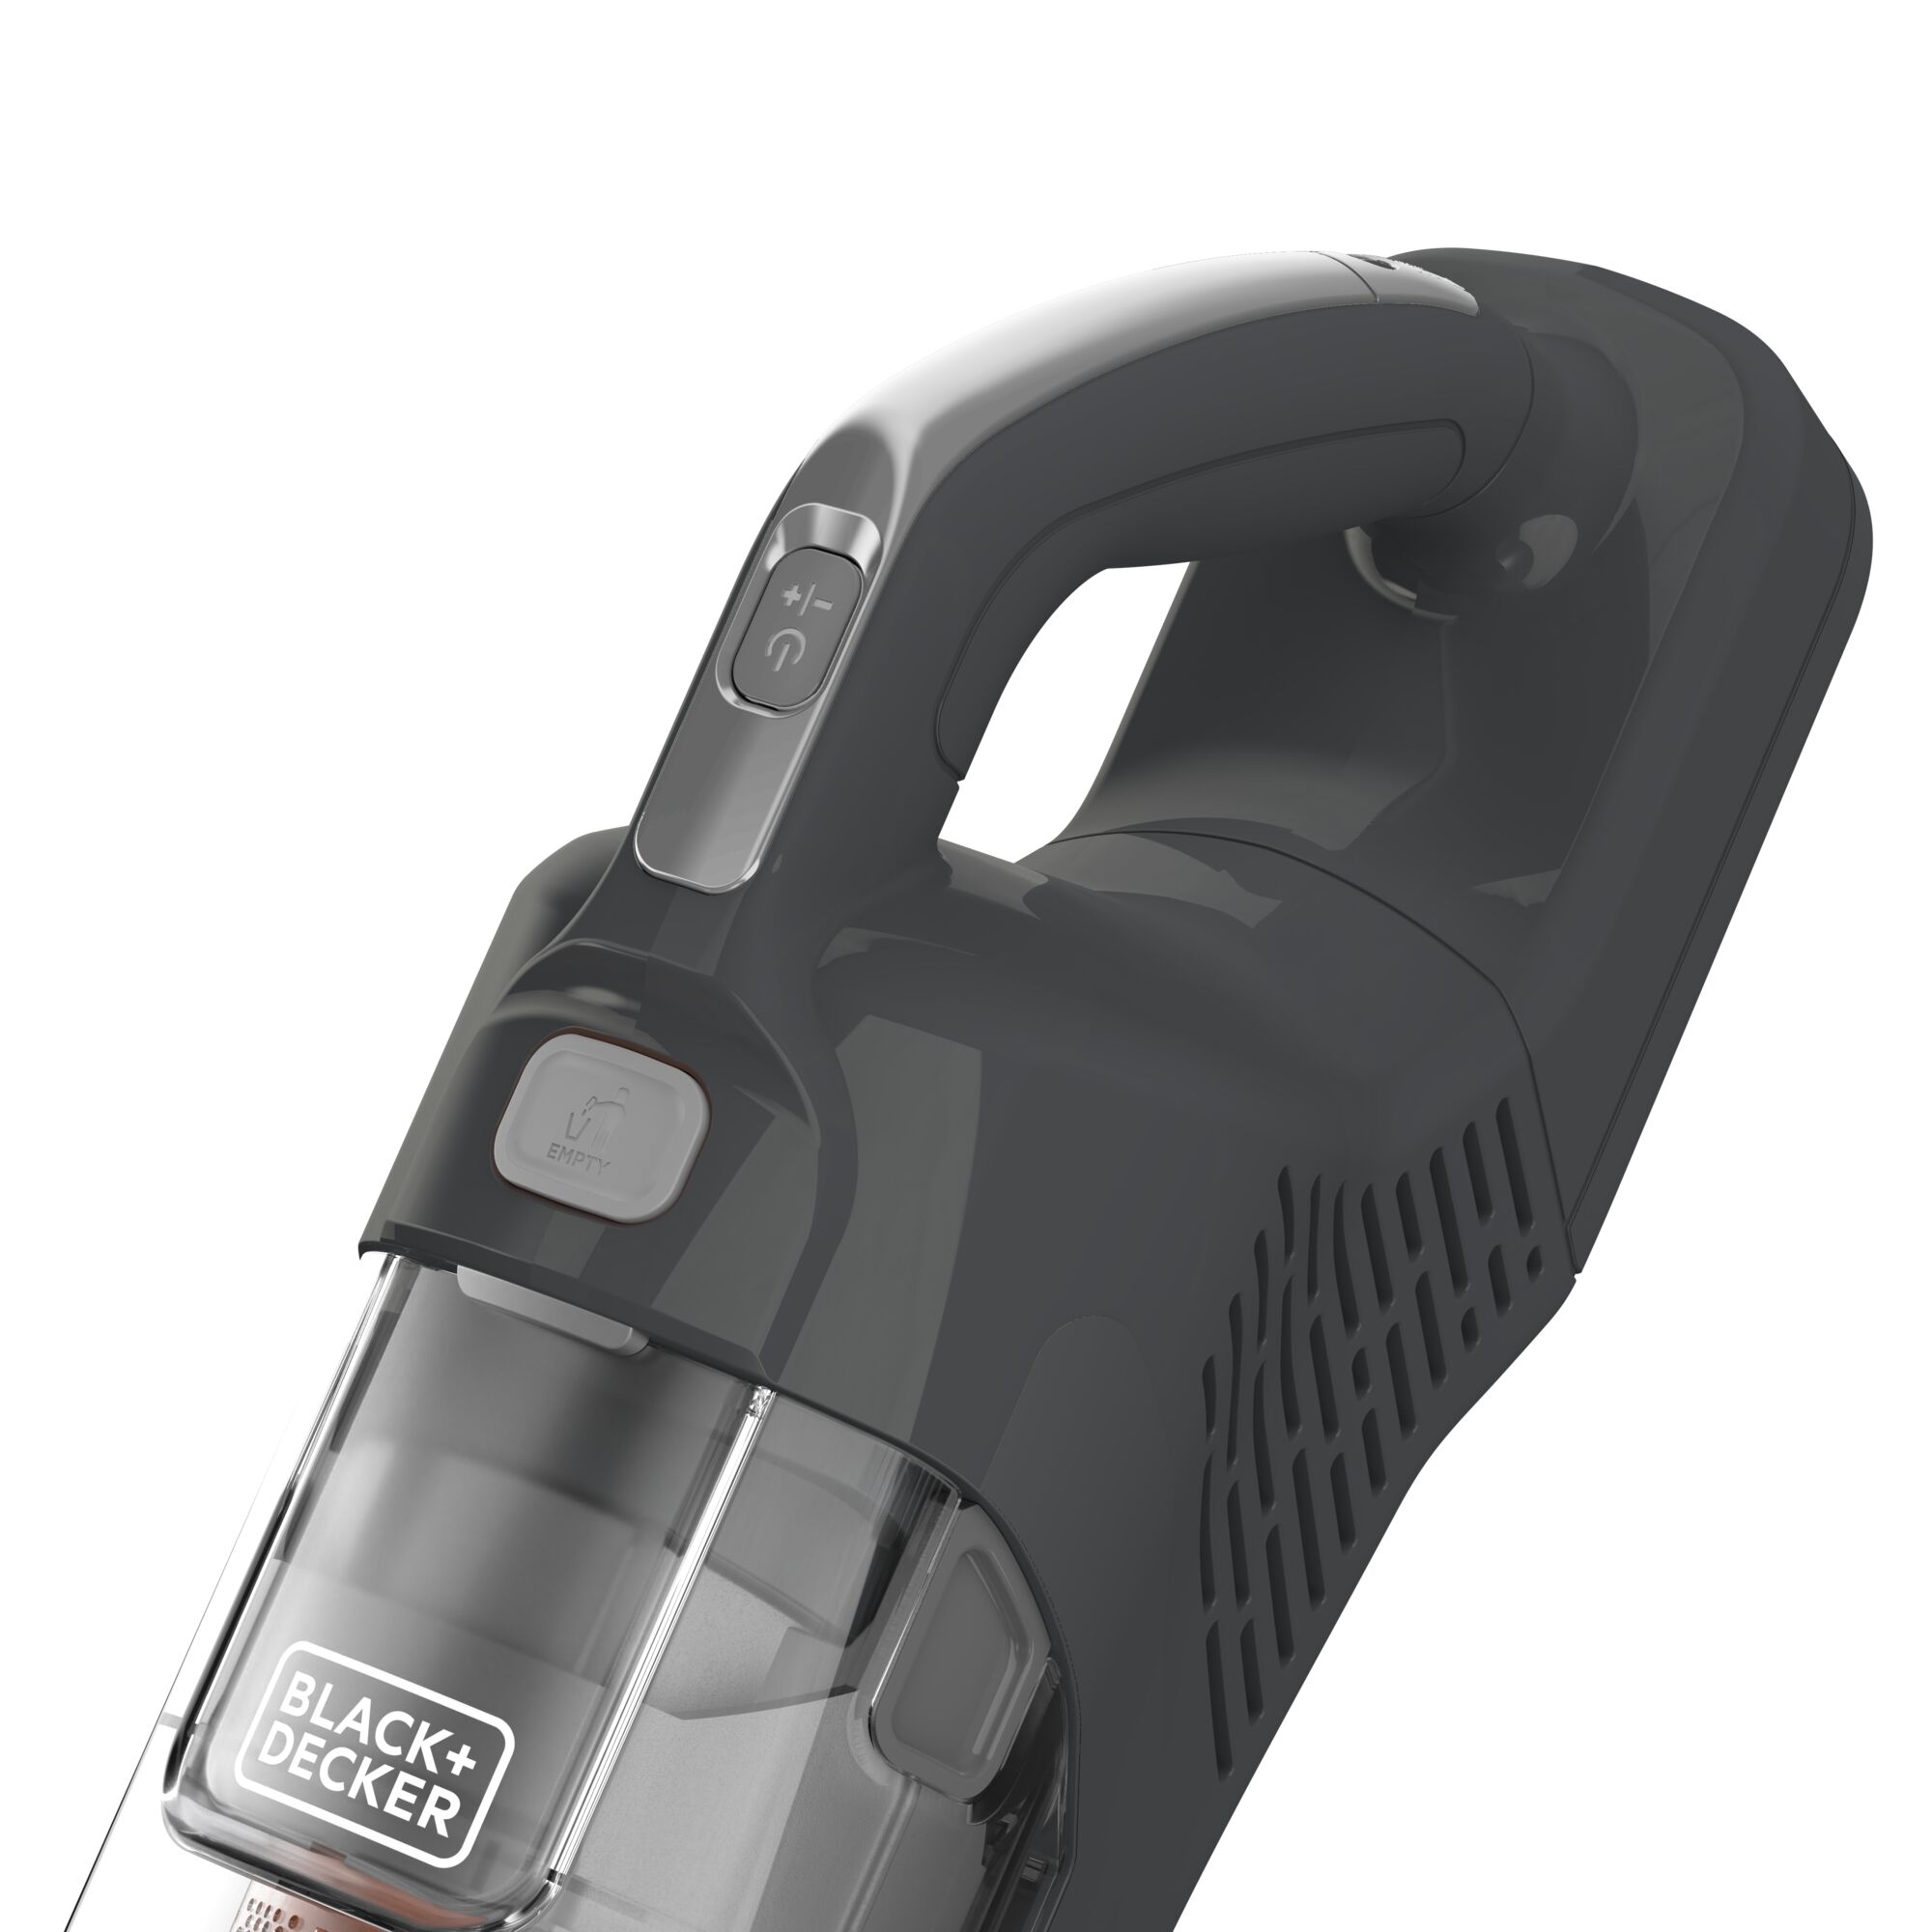 18V 2-in-1 Stick Vacuum With Integral 2Ah Battery | BLACK+DECKER